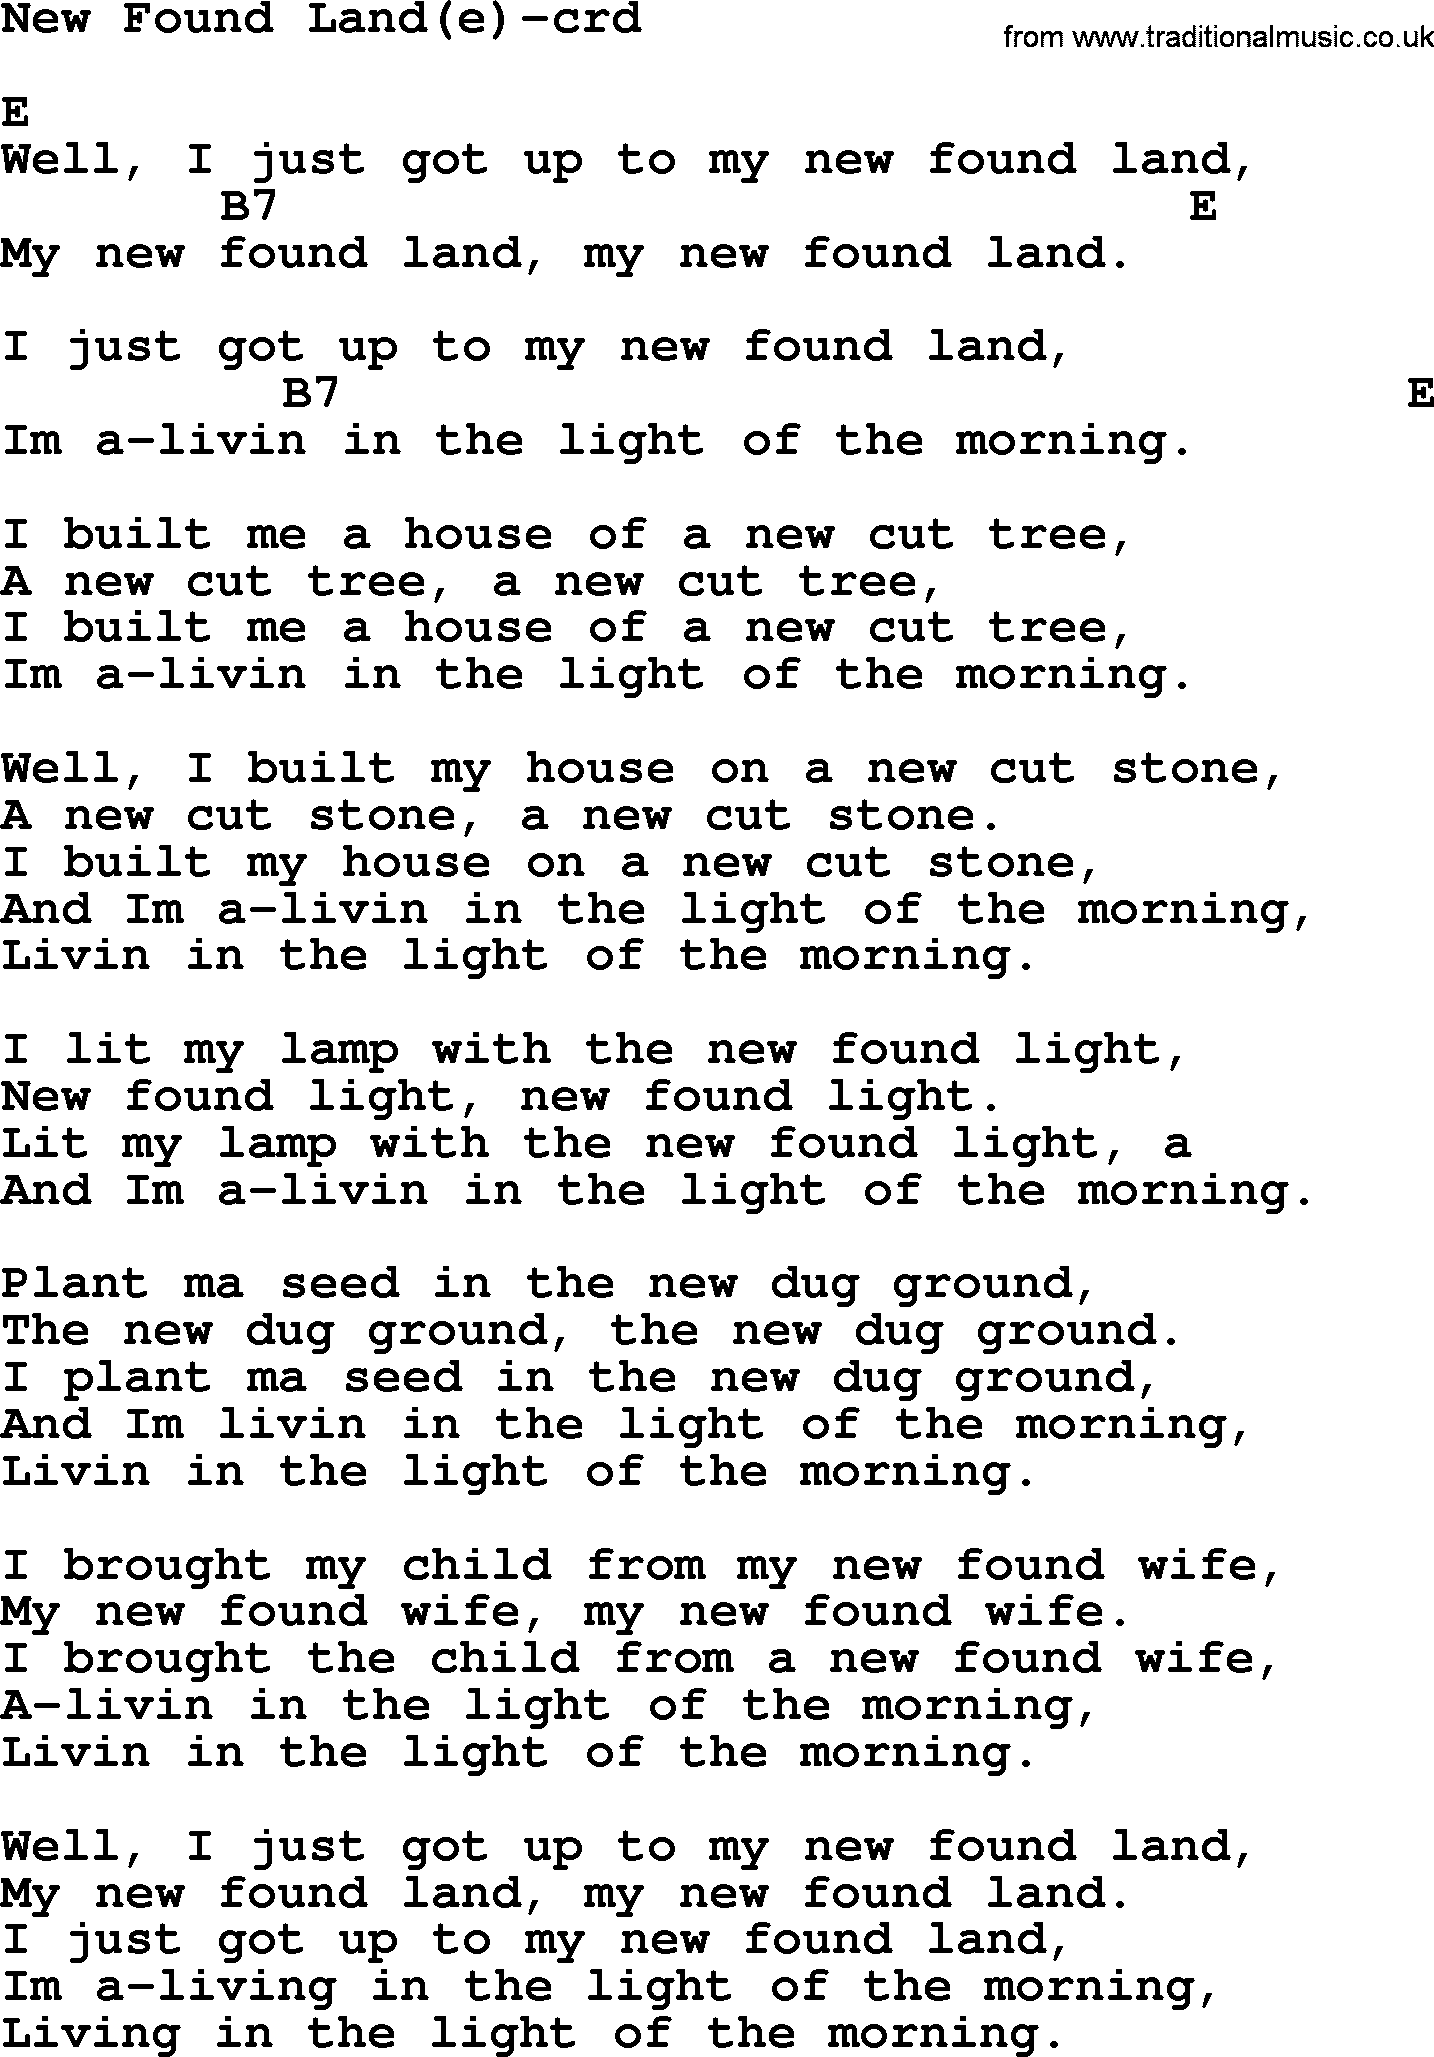 Woody Guthrie song New Found Land(e) lyrics and chords